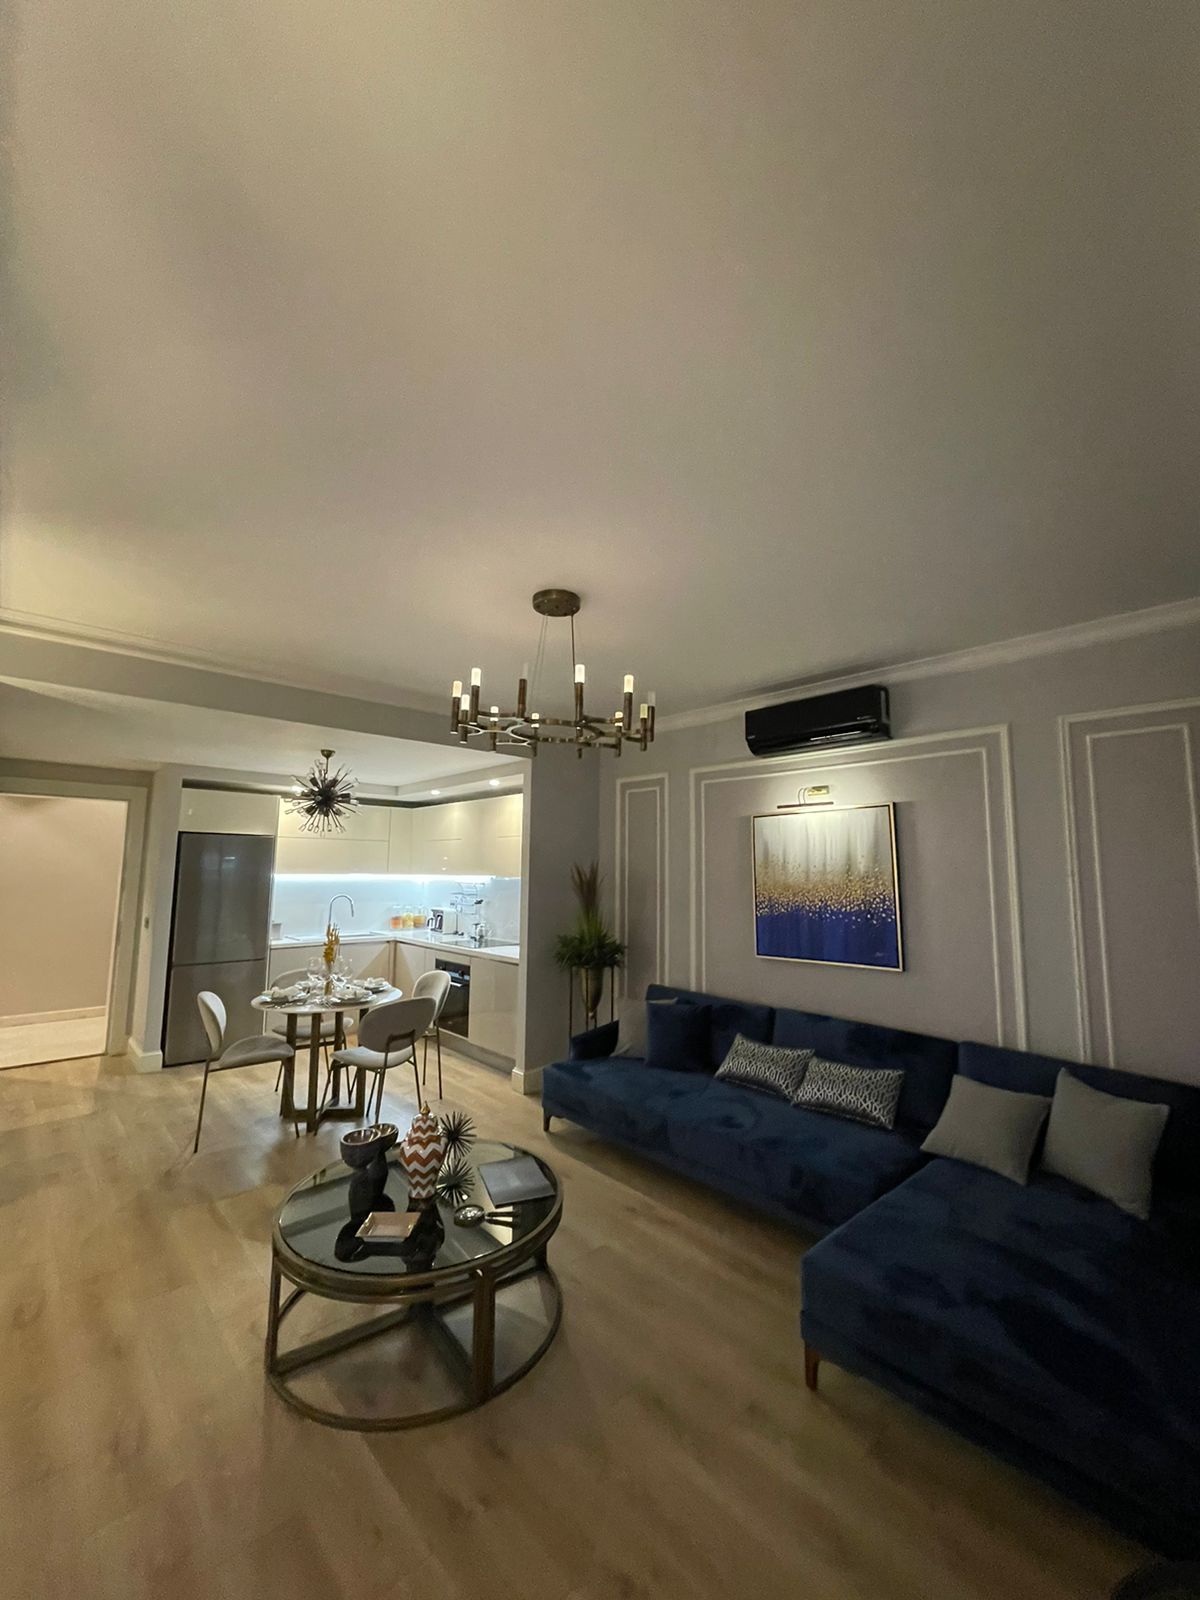 Taksim 360 project offers different properties for sale